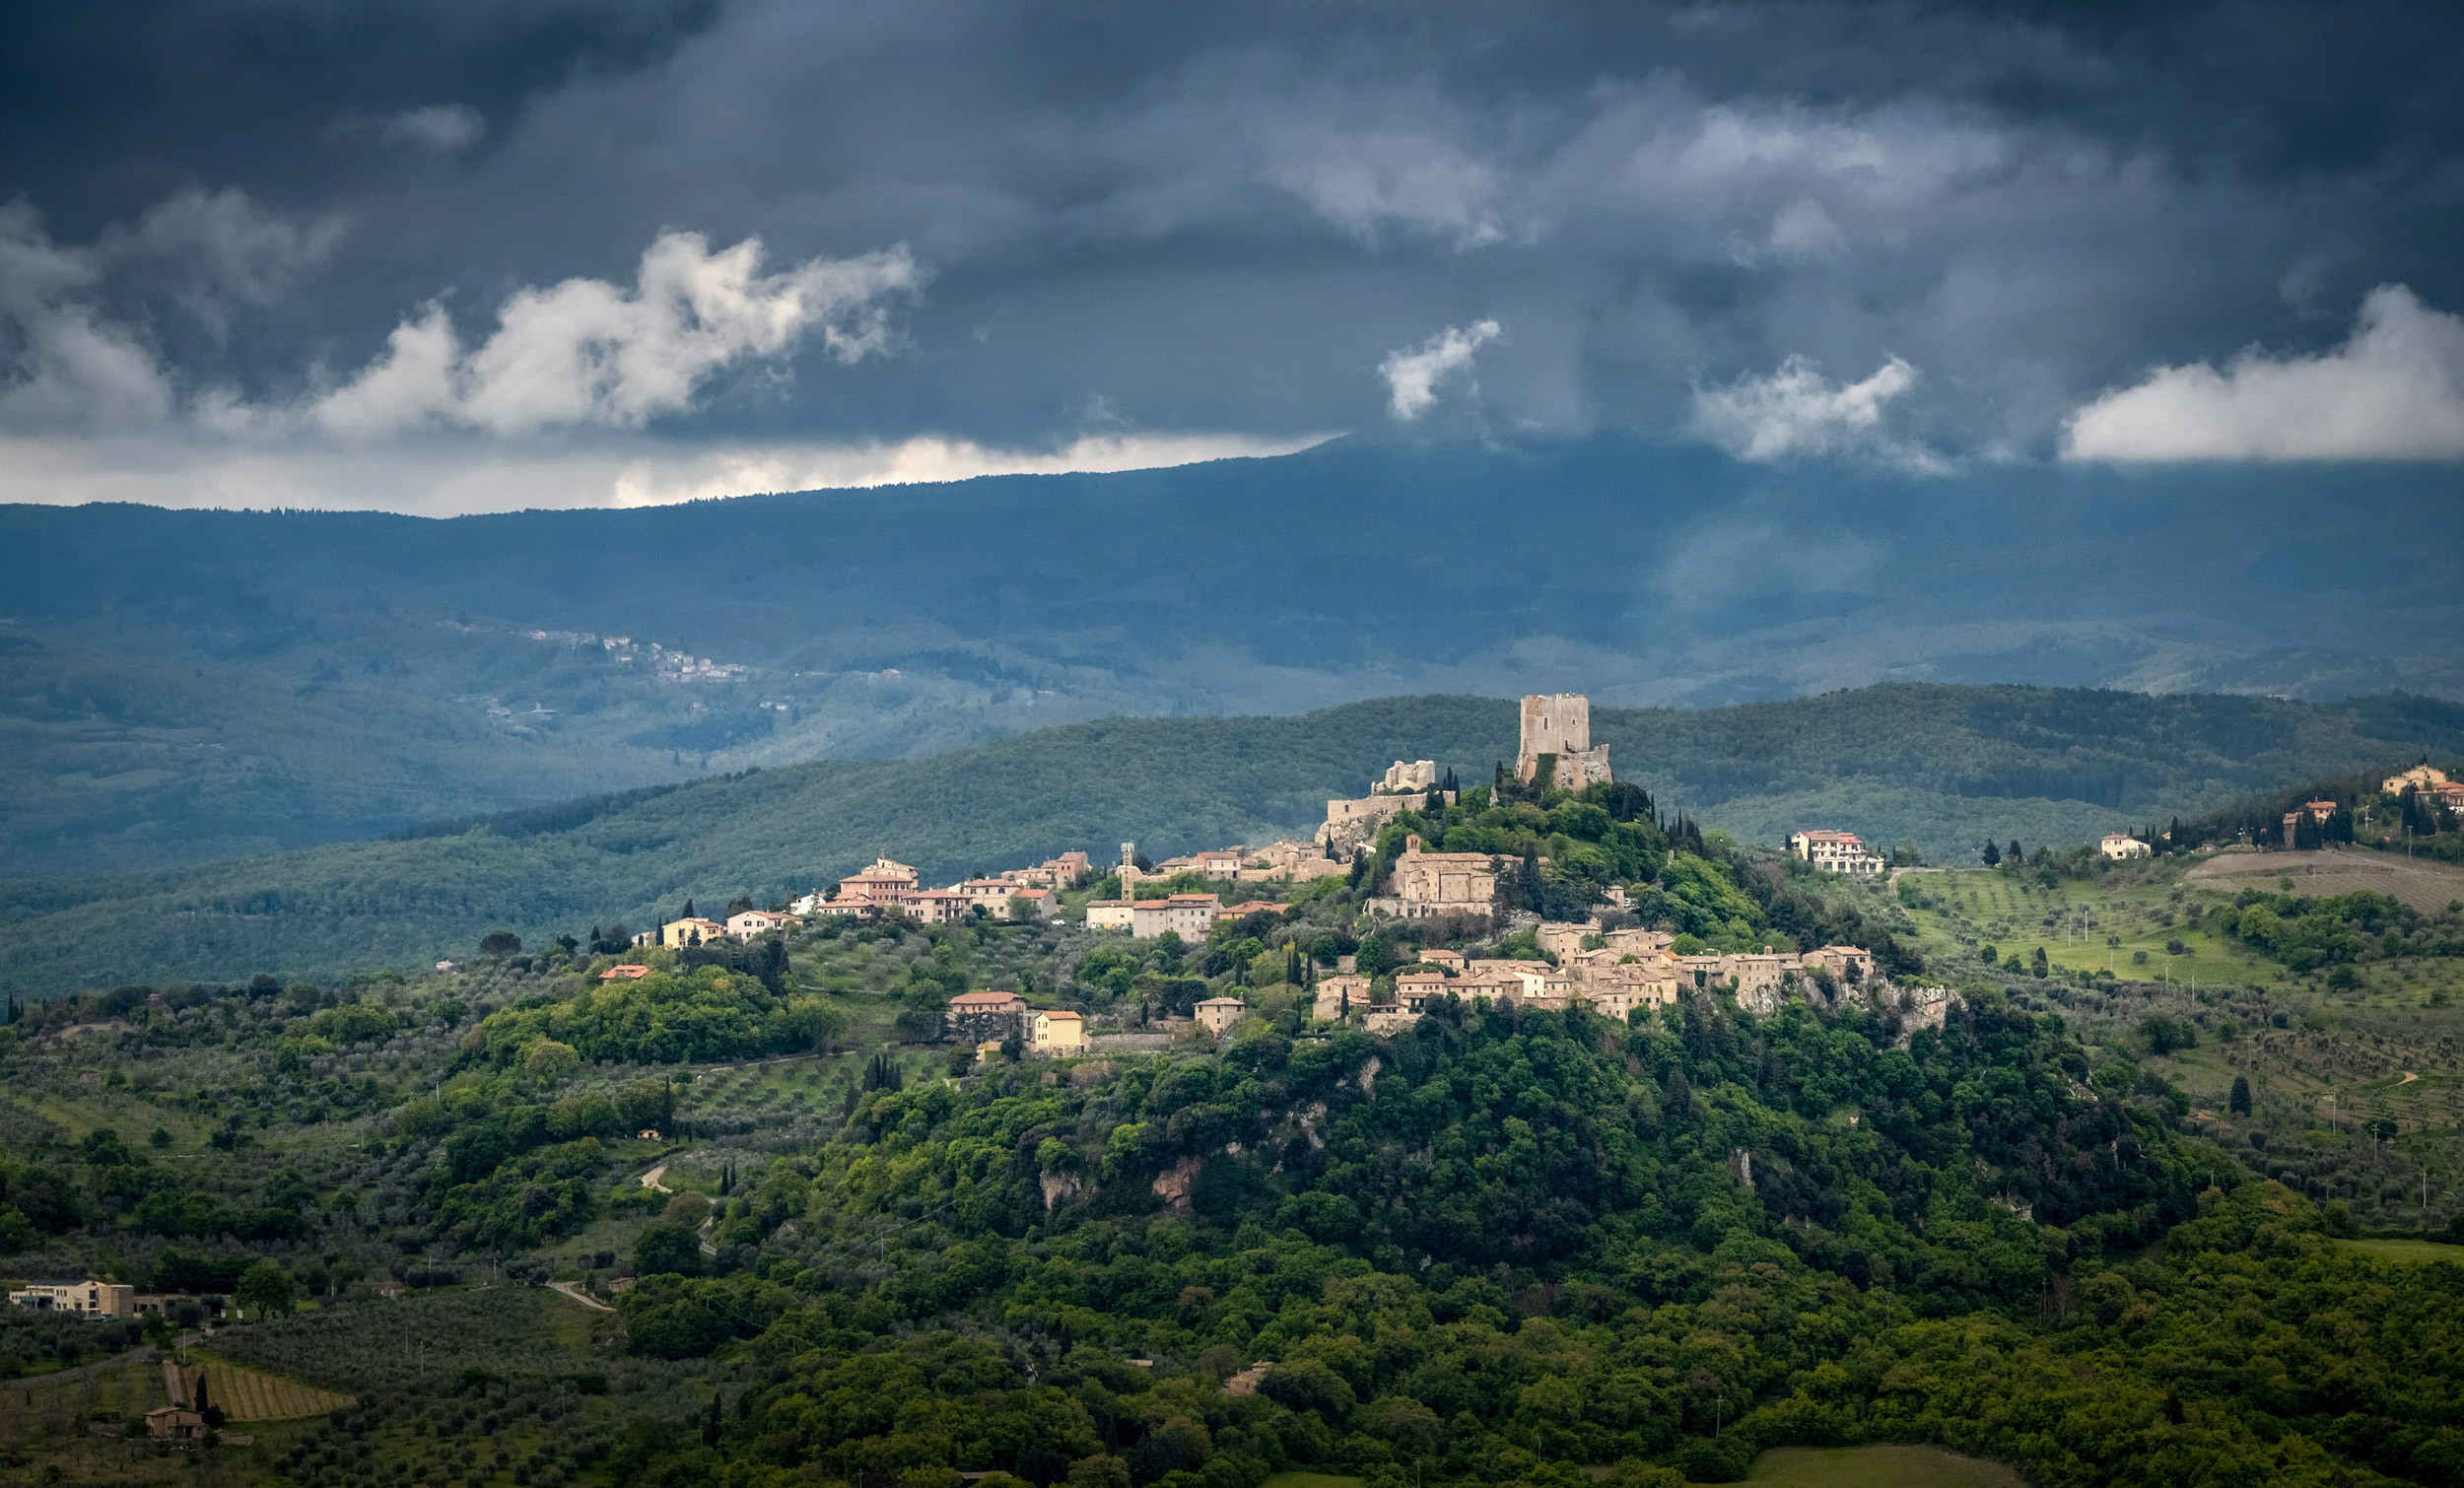 VAL D ORCIA, TUSCANY – MAY 04, 2019: Storm over small city of Ca